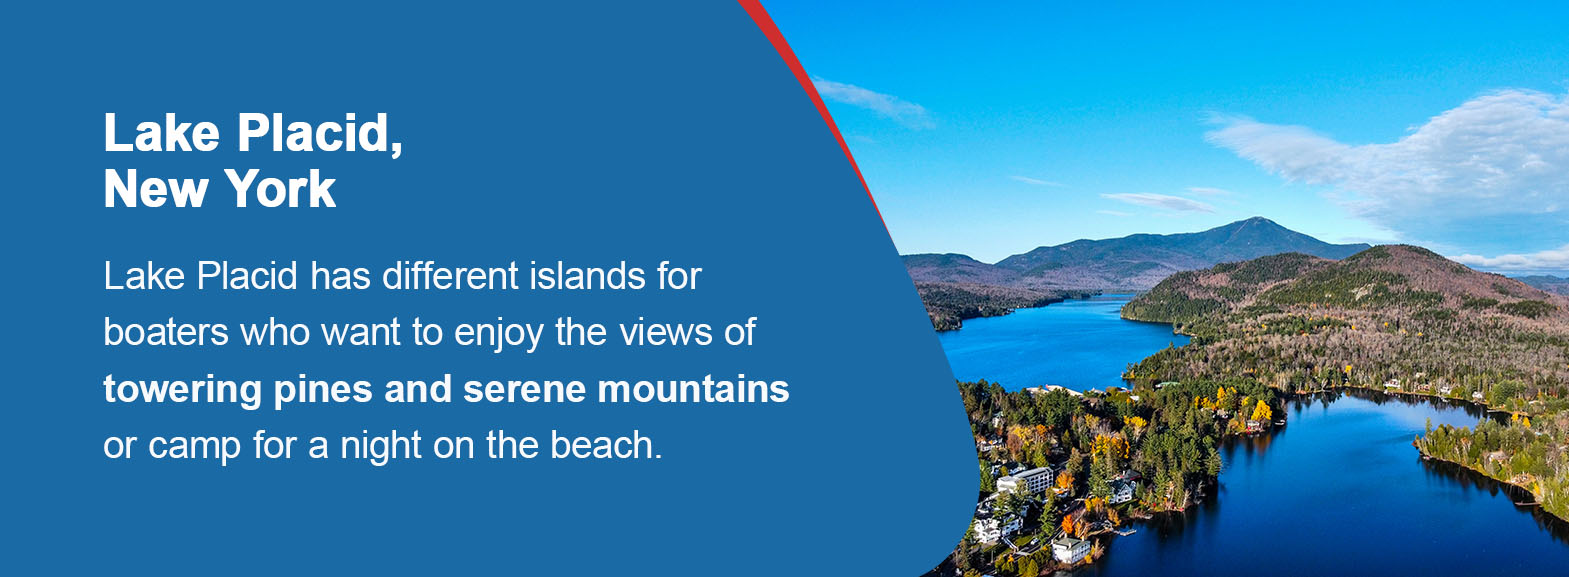 Lake Placid has different islands for boaters who want to enjoy the views of towering pines and serene mountains or camp for a night on the beach.